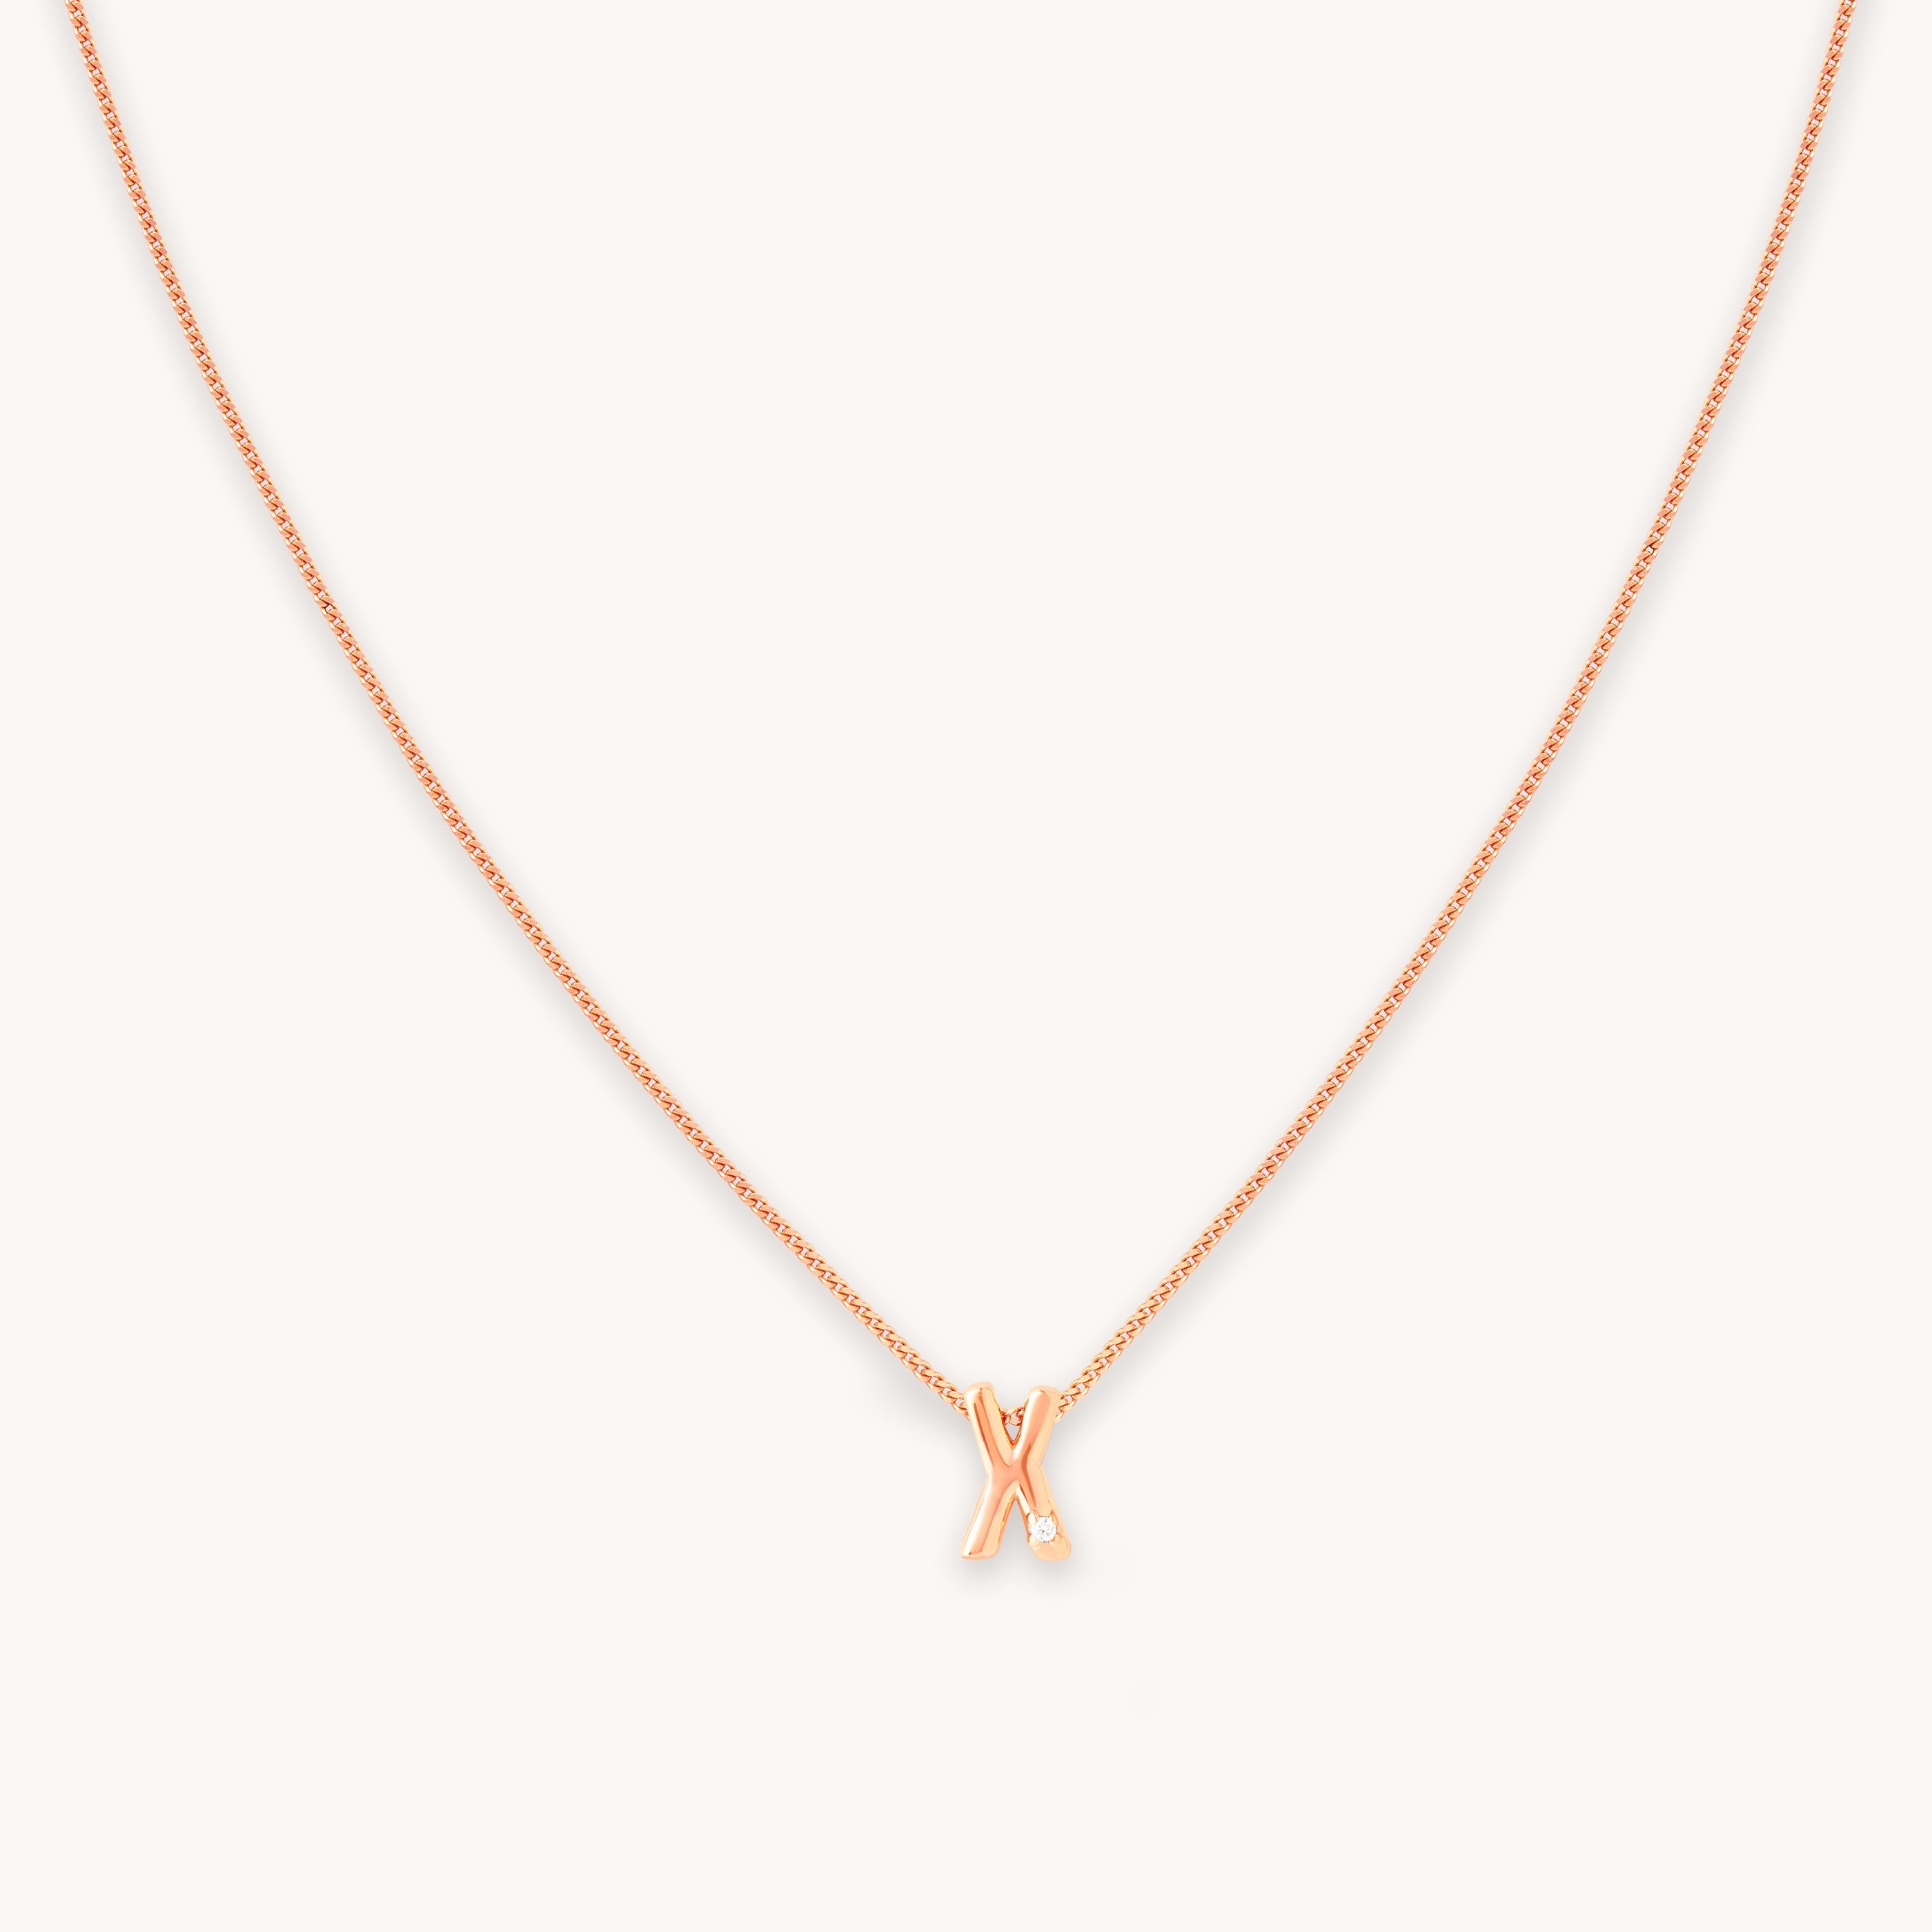 X Initial Pendant Necklace in Rose Gold